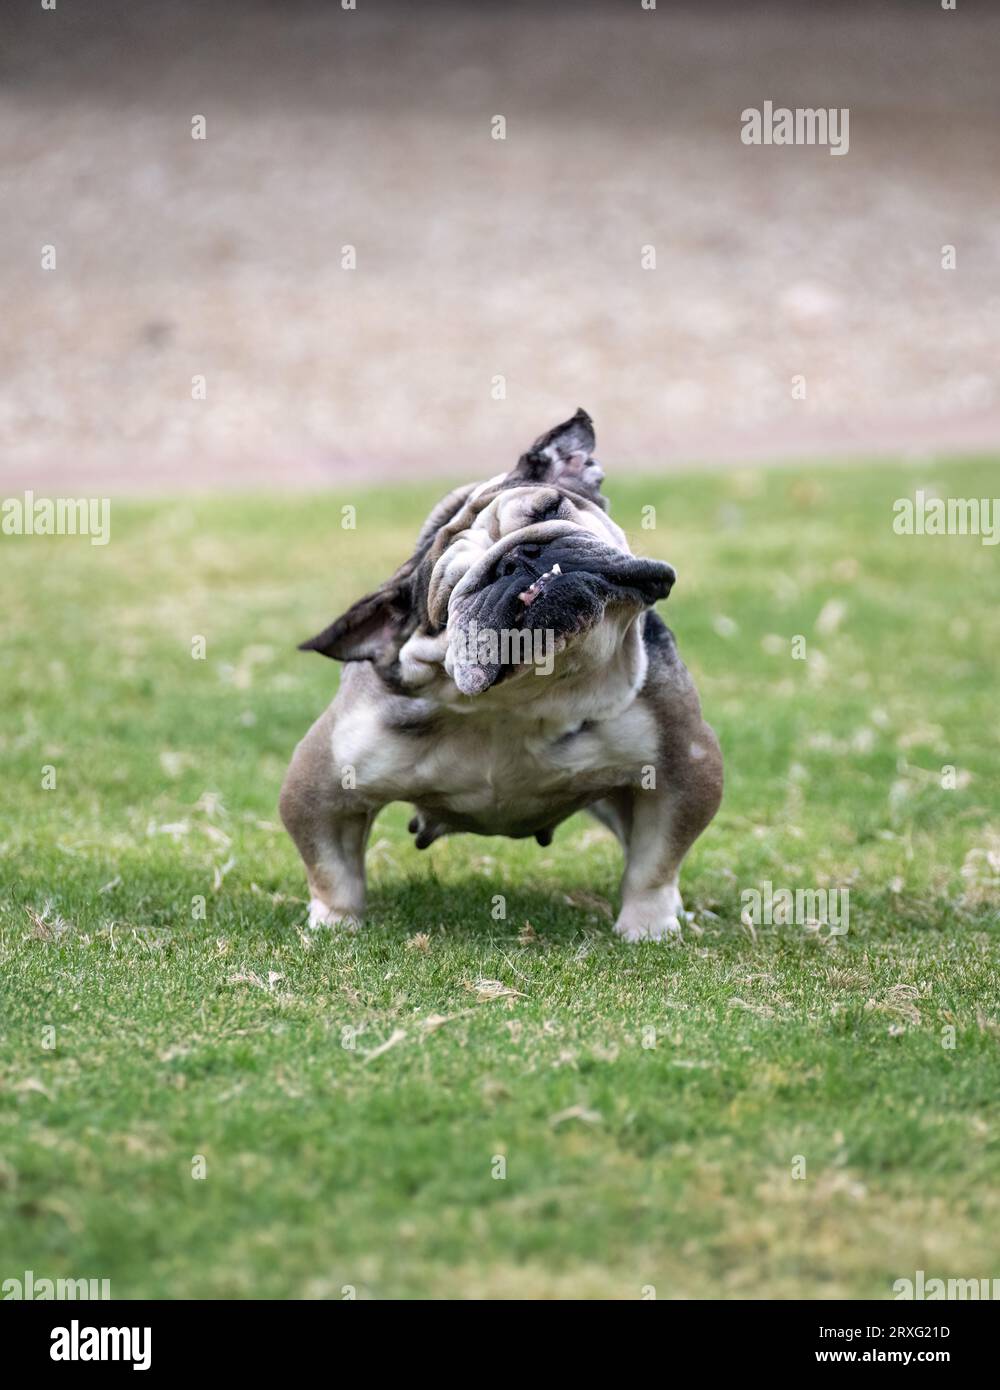 Bulldog in mid-shake playing in the green grass Stock Photo